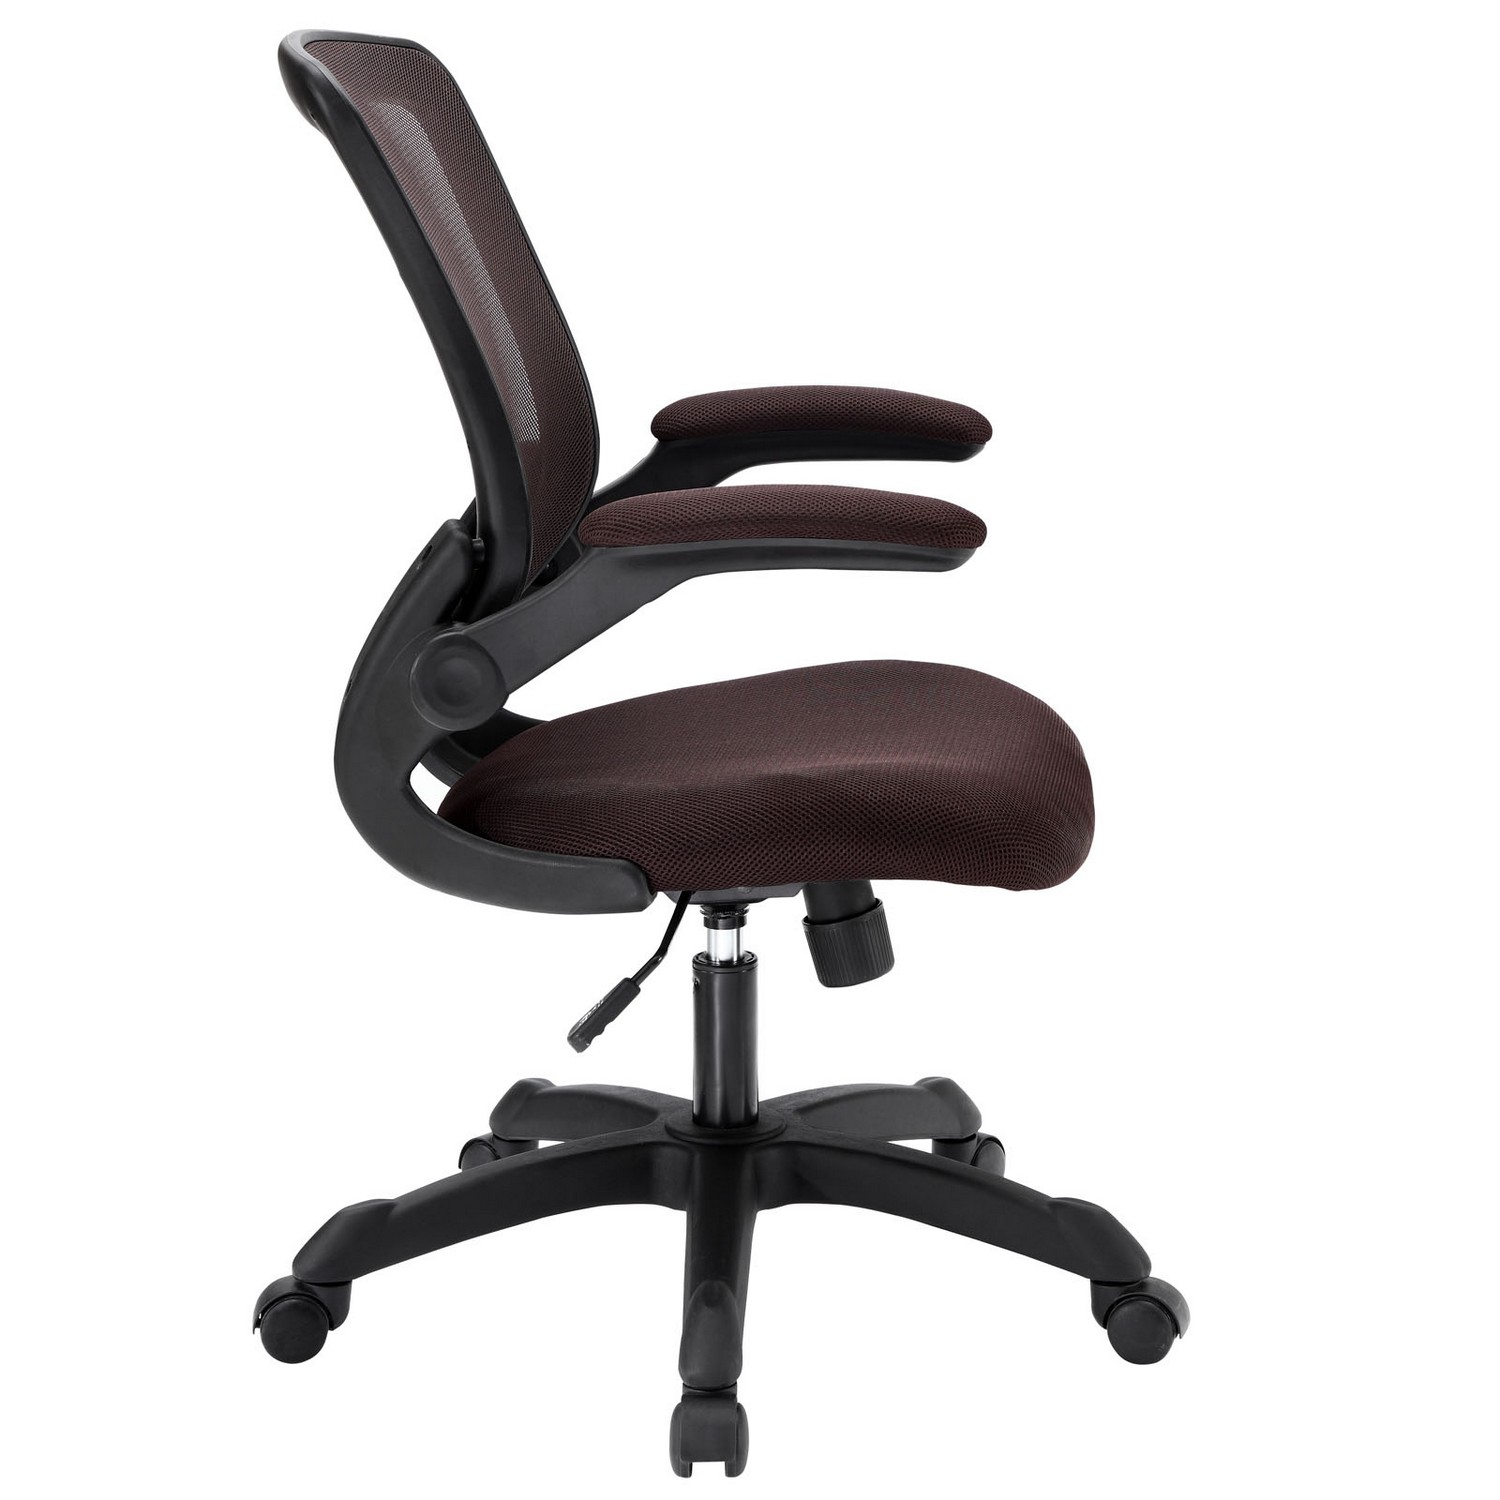 Modway Veer Mesh Office Chair - Brown